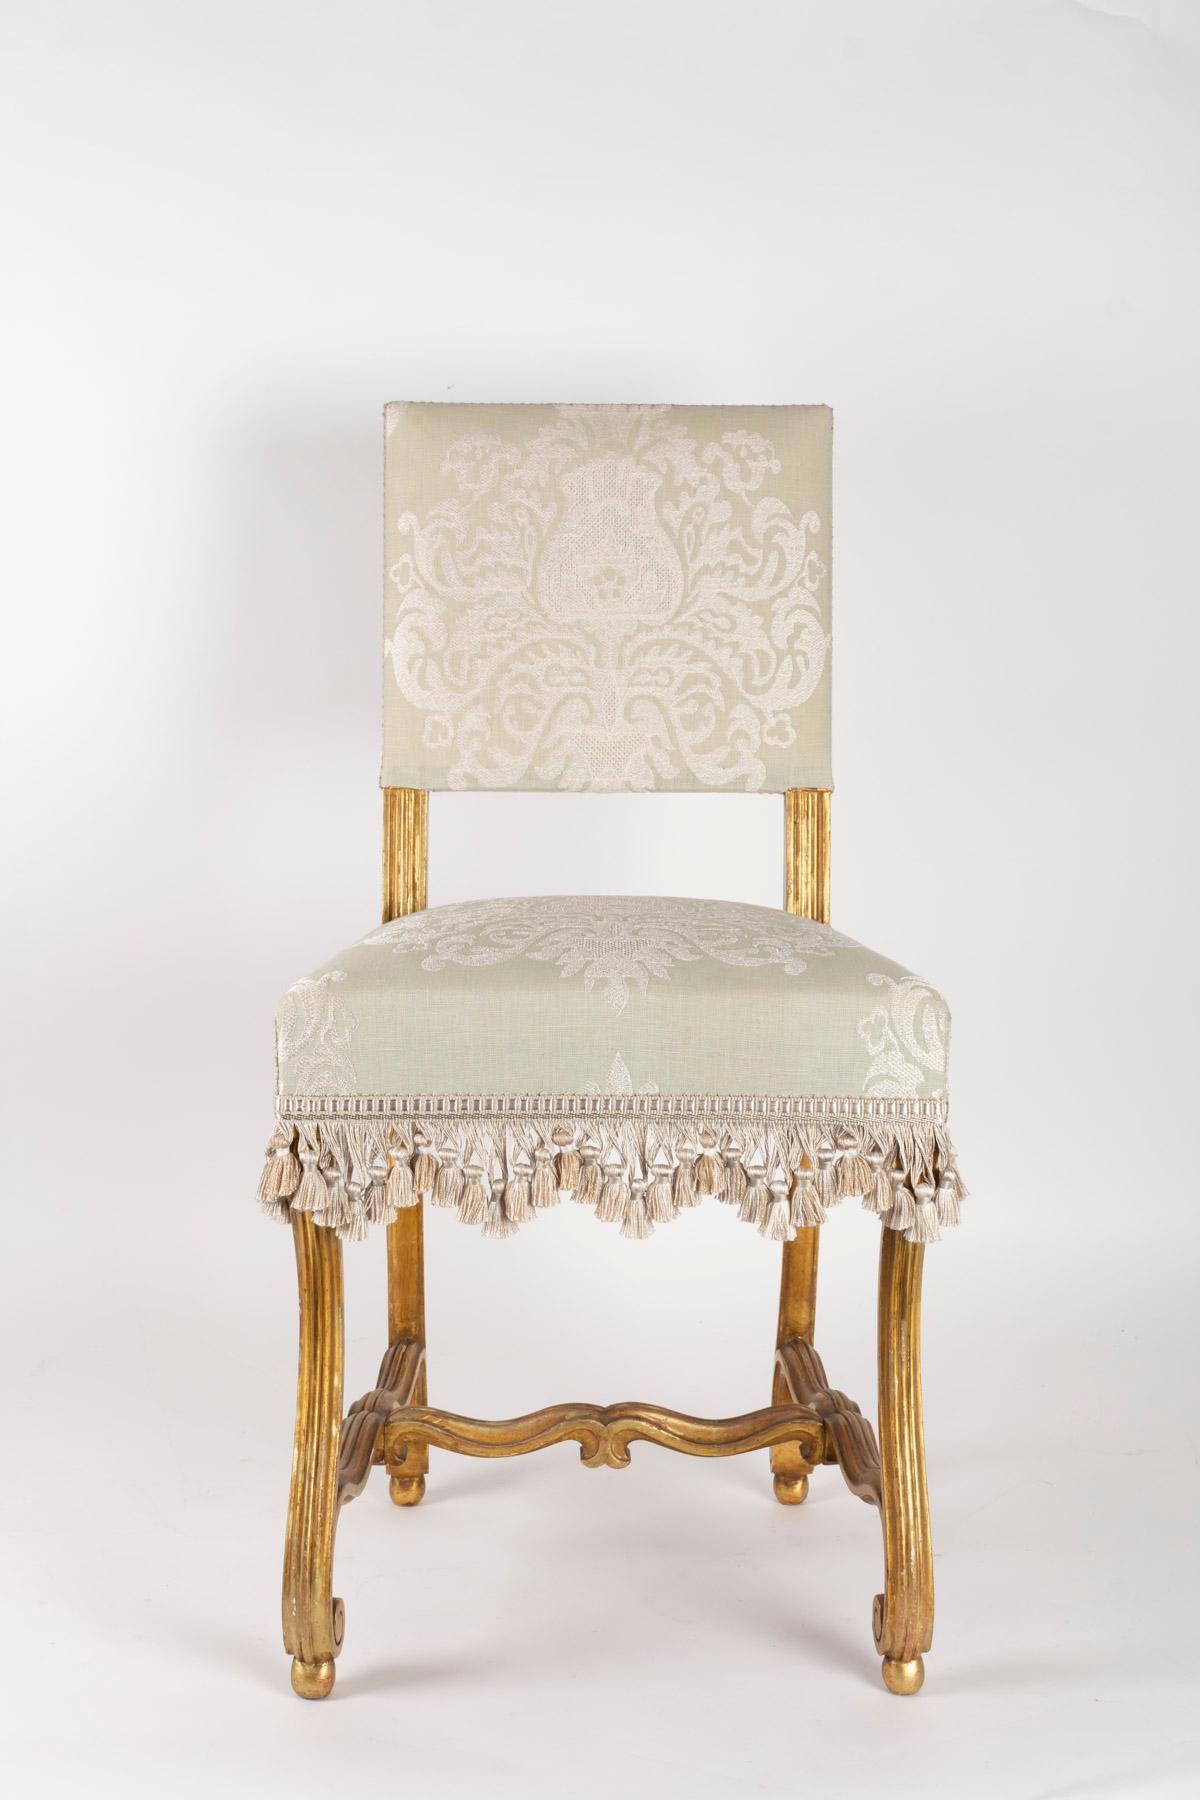 Late 19th Century Pair of Chairs, Sheep Bones, Carved and Gilded Wooden, Napoleon III Period